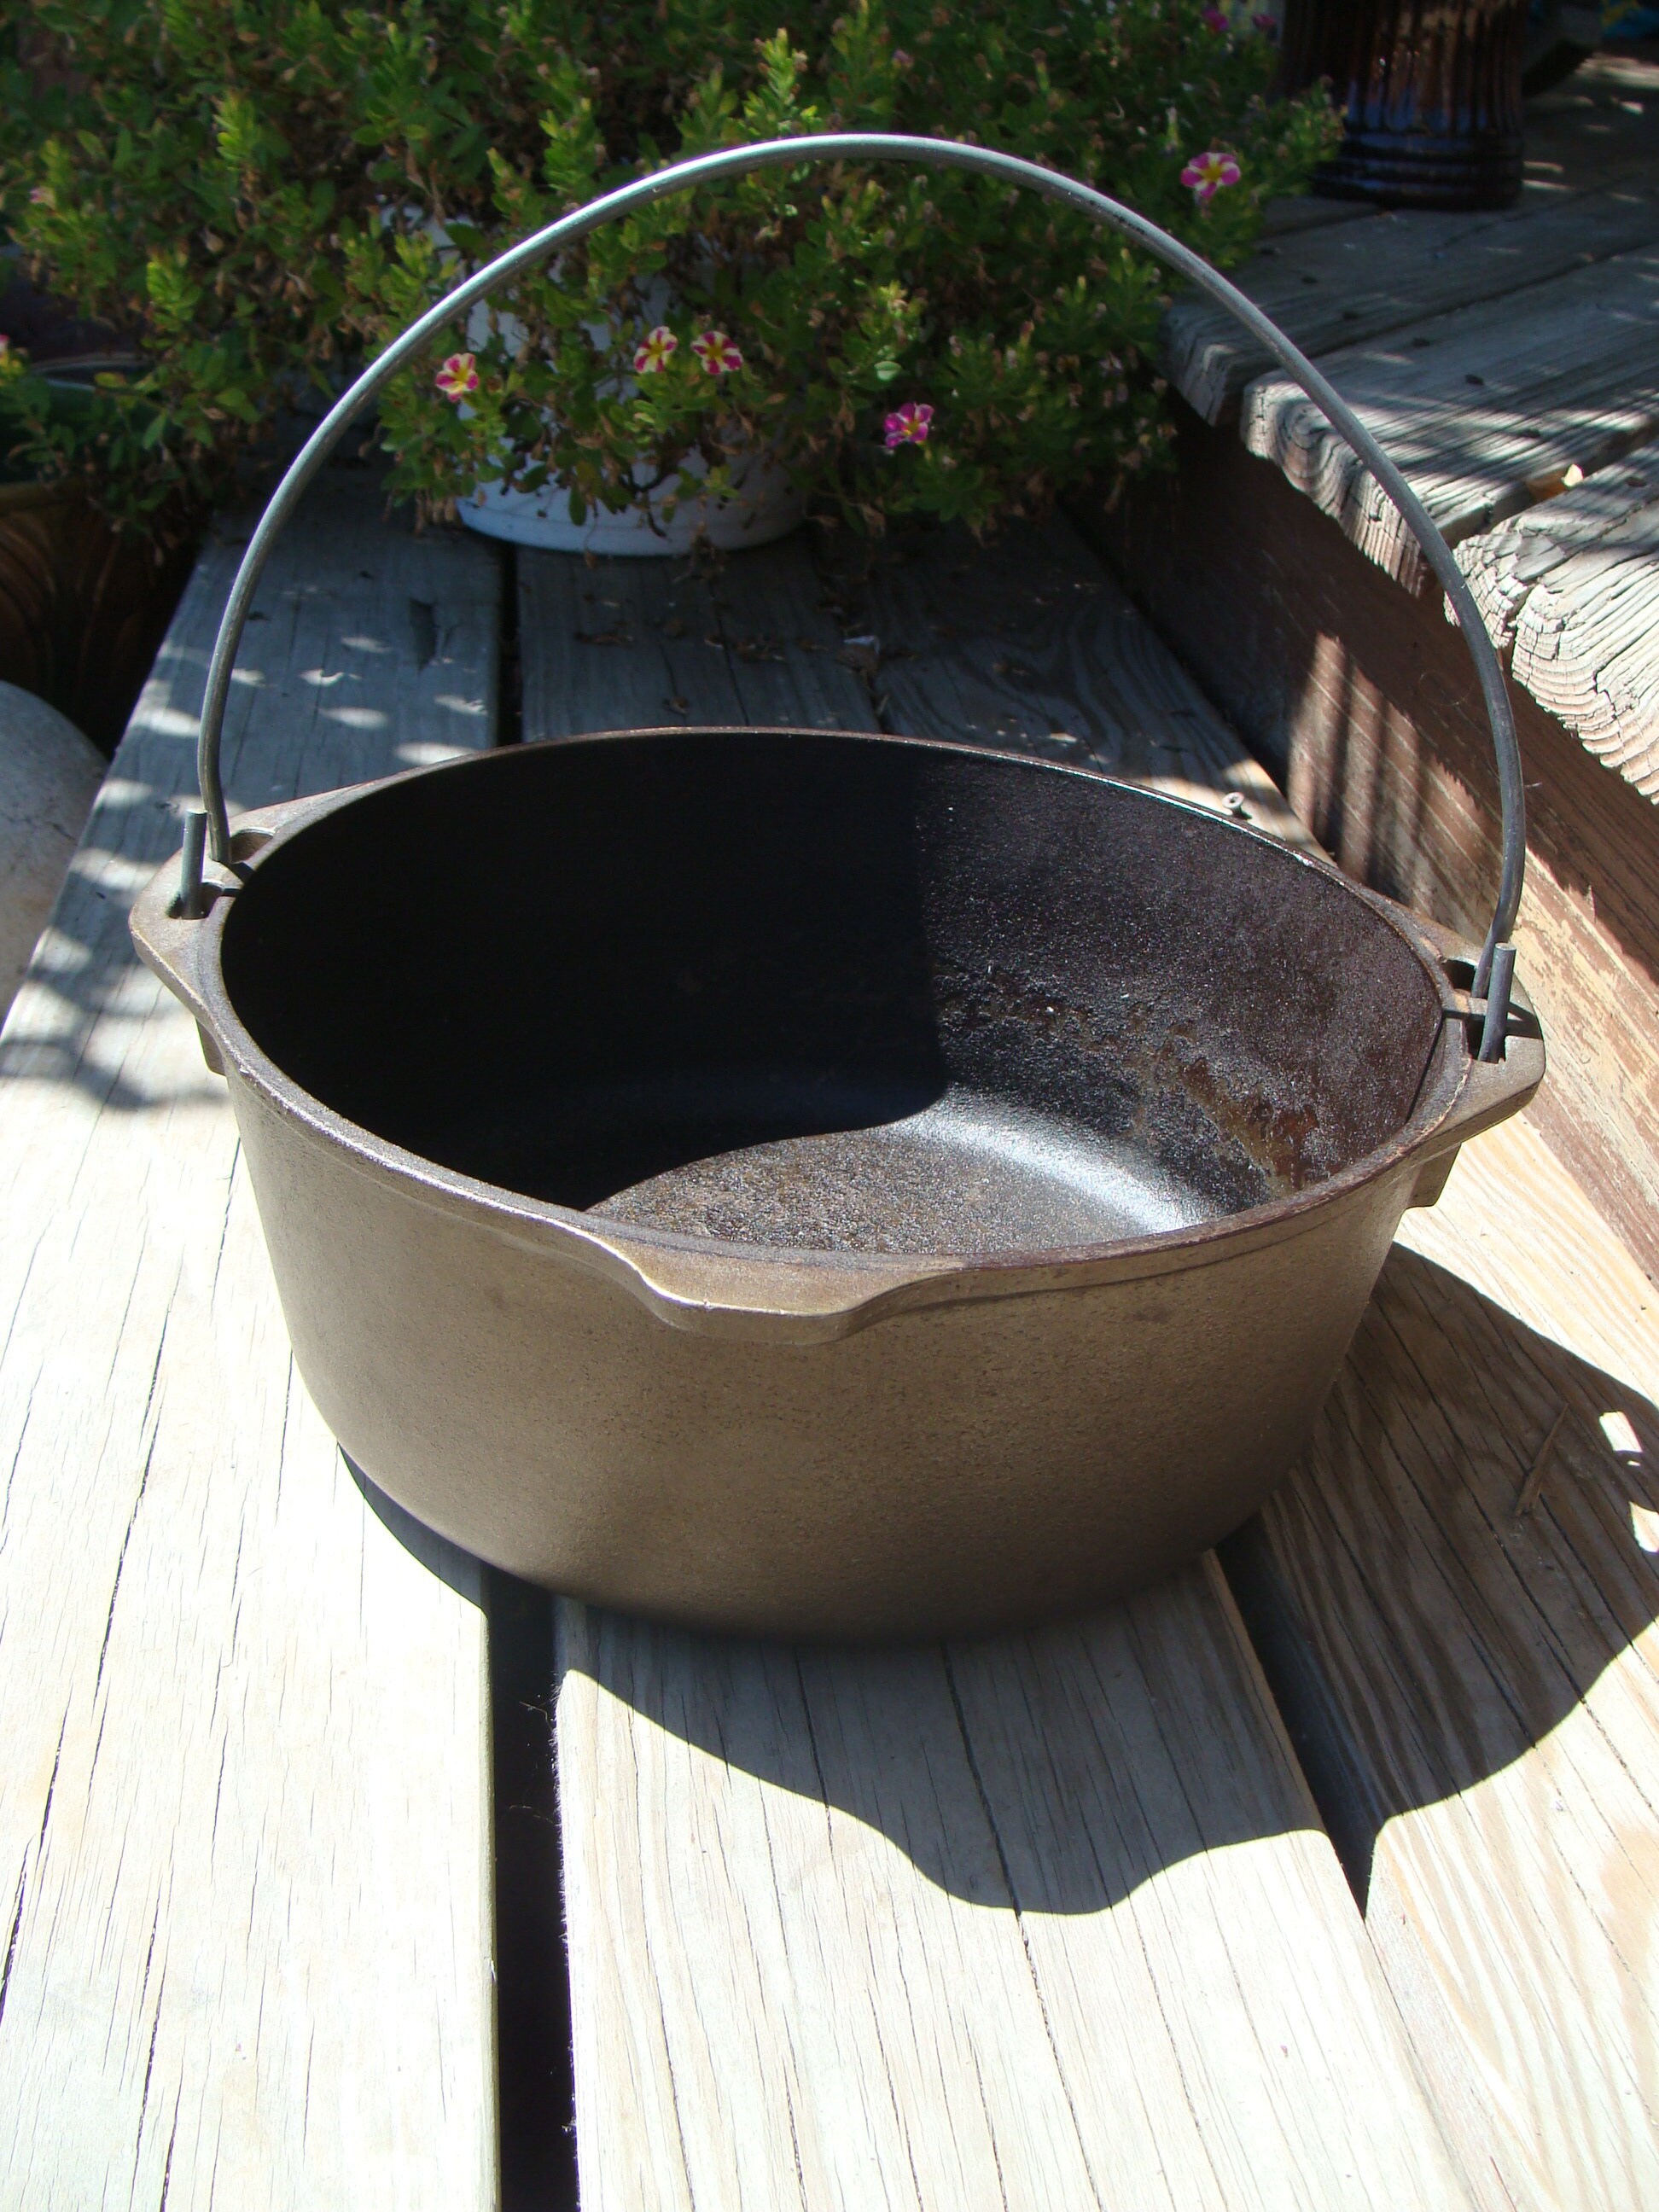 Small Cast Iron Cauldron/Gypsy Pot/Camp Oven - Hammered Lid for